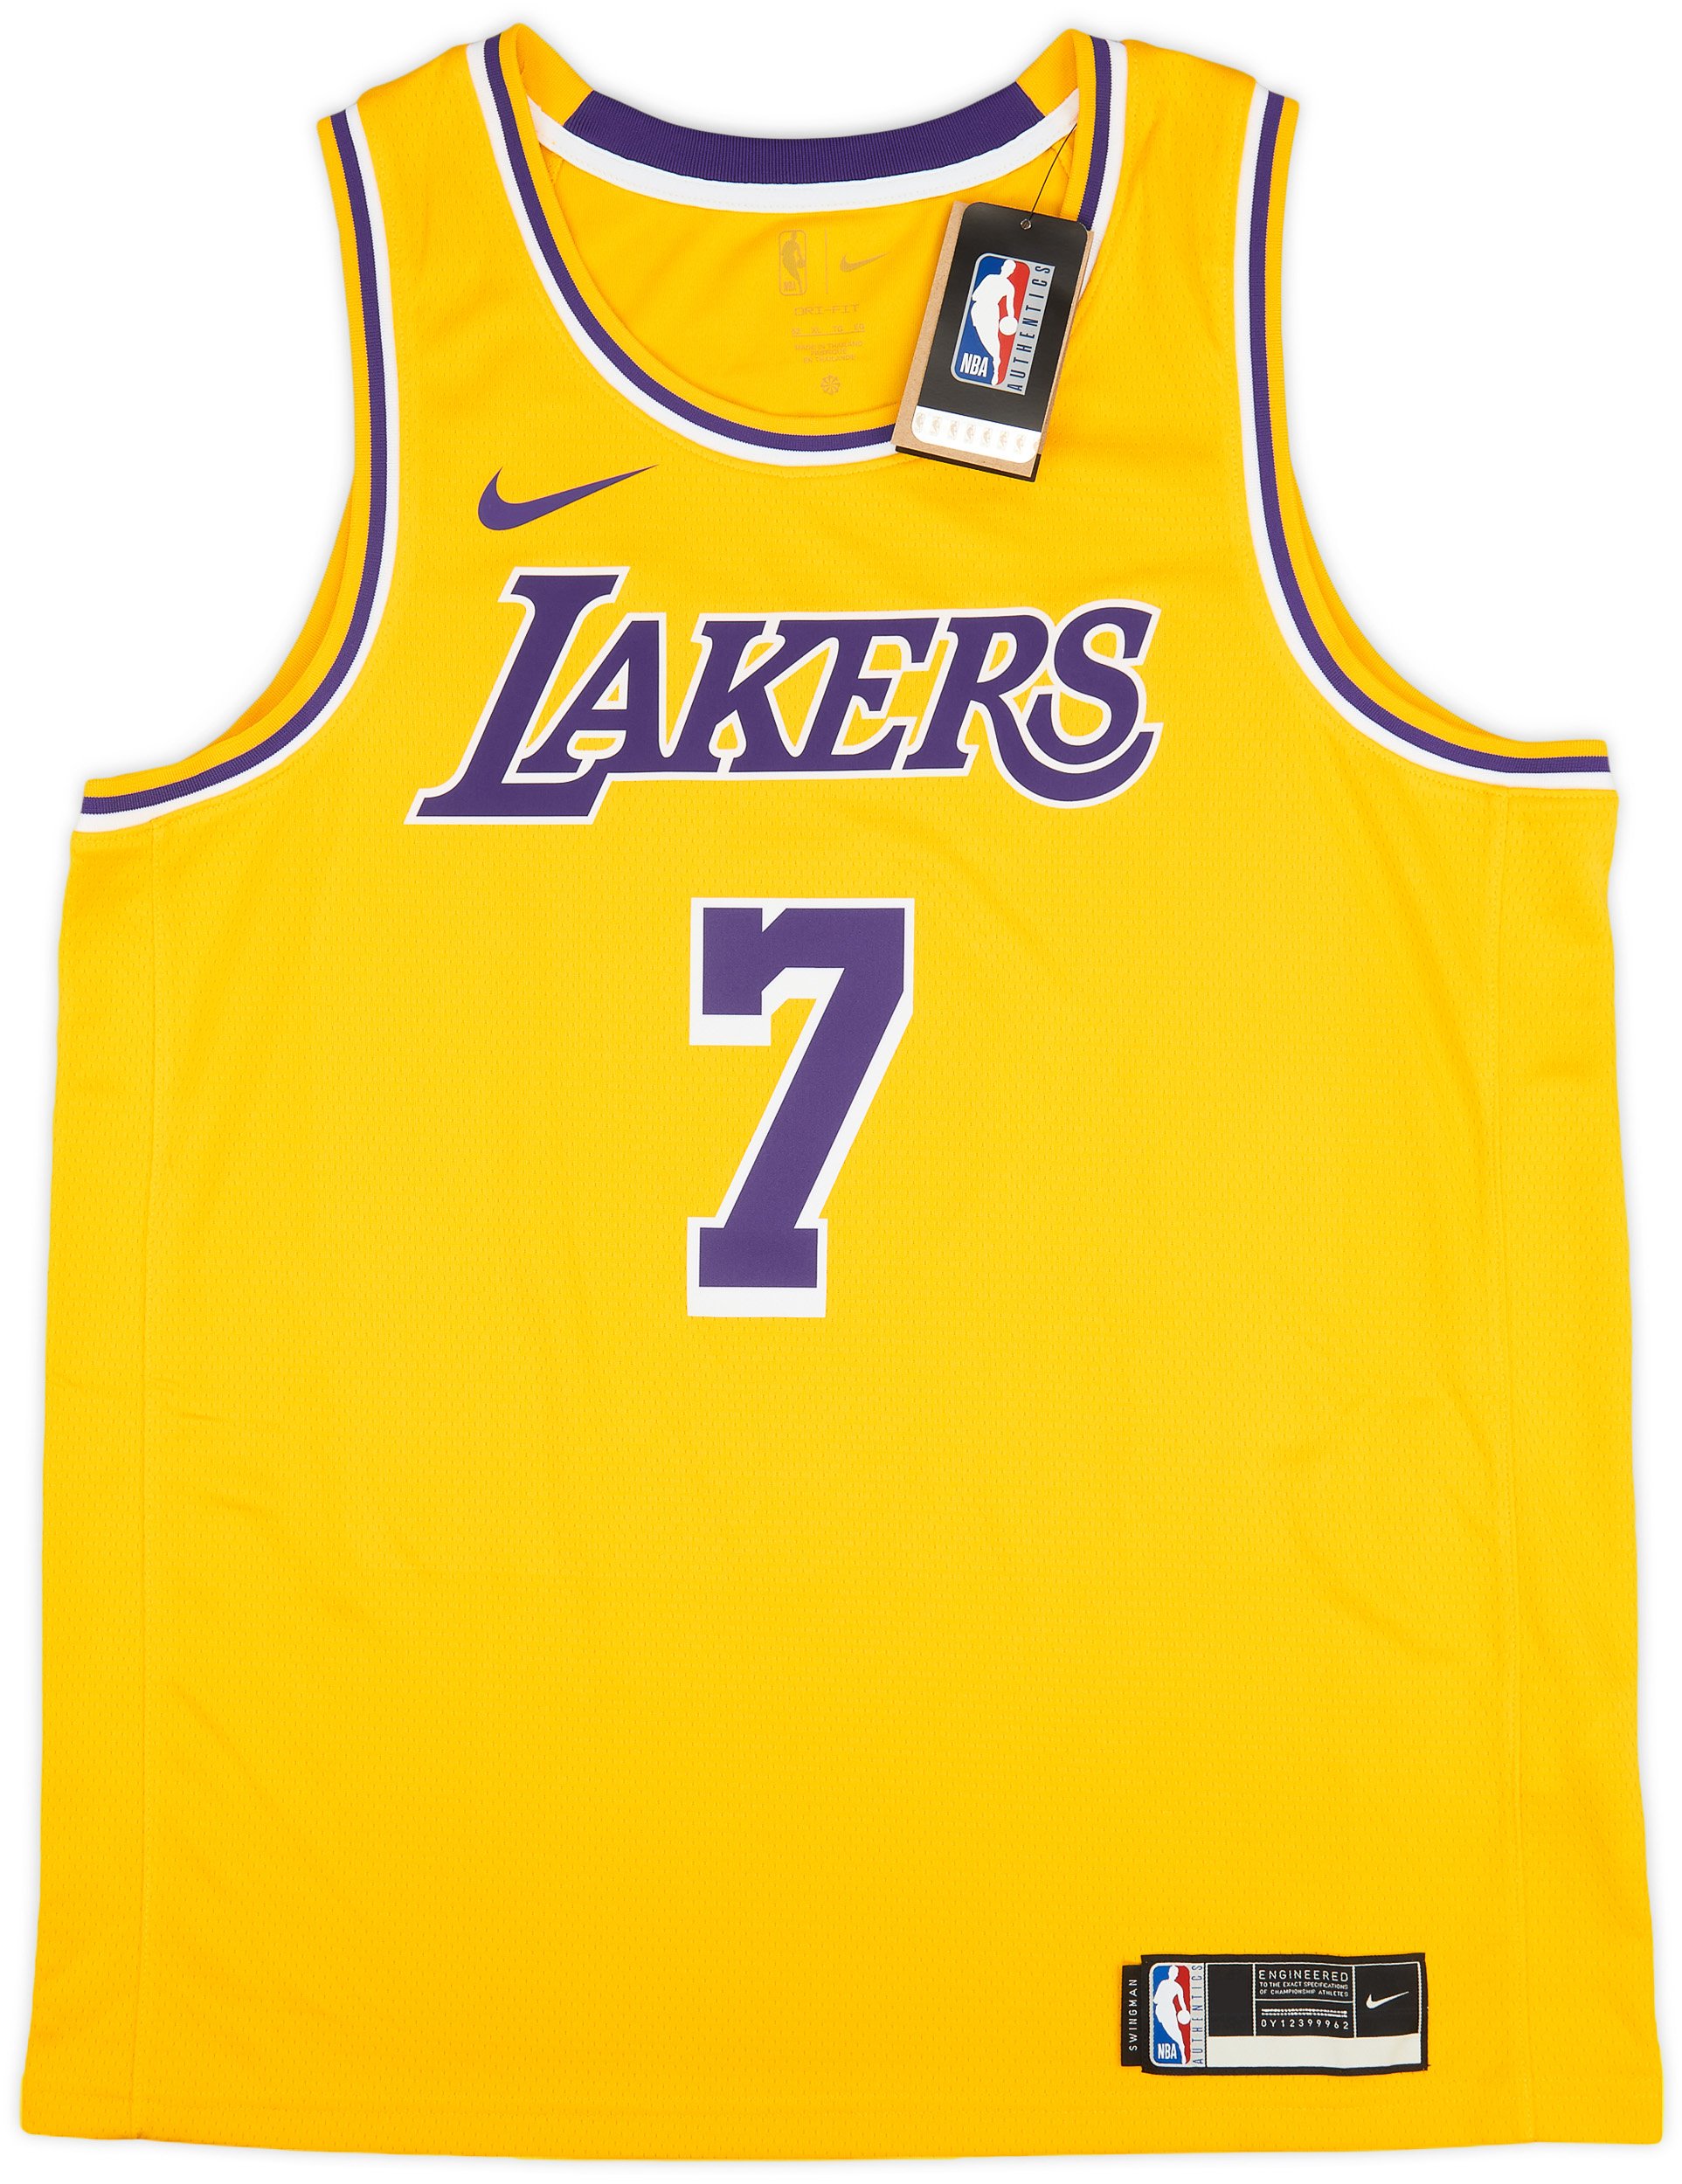 2021 lakers jersey